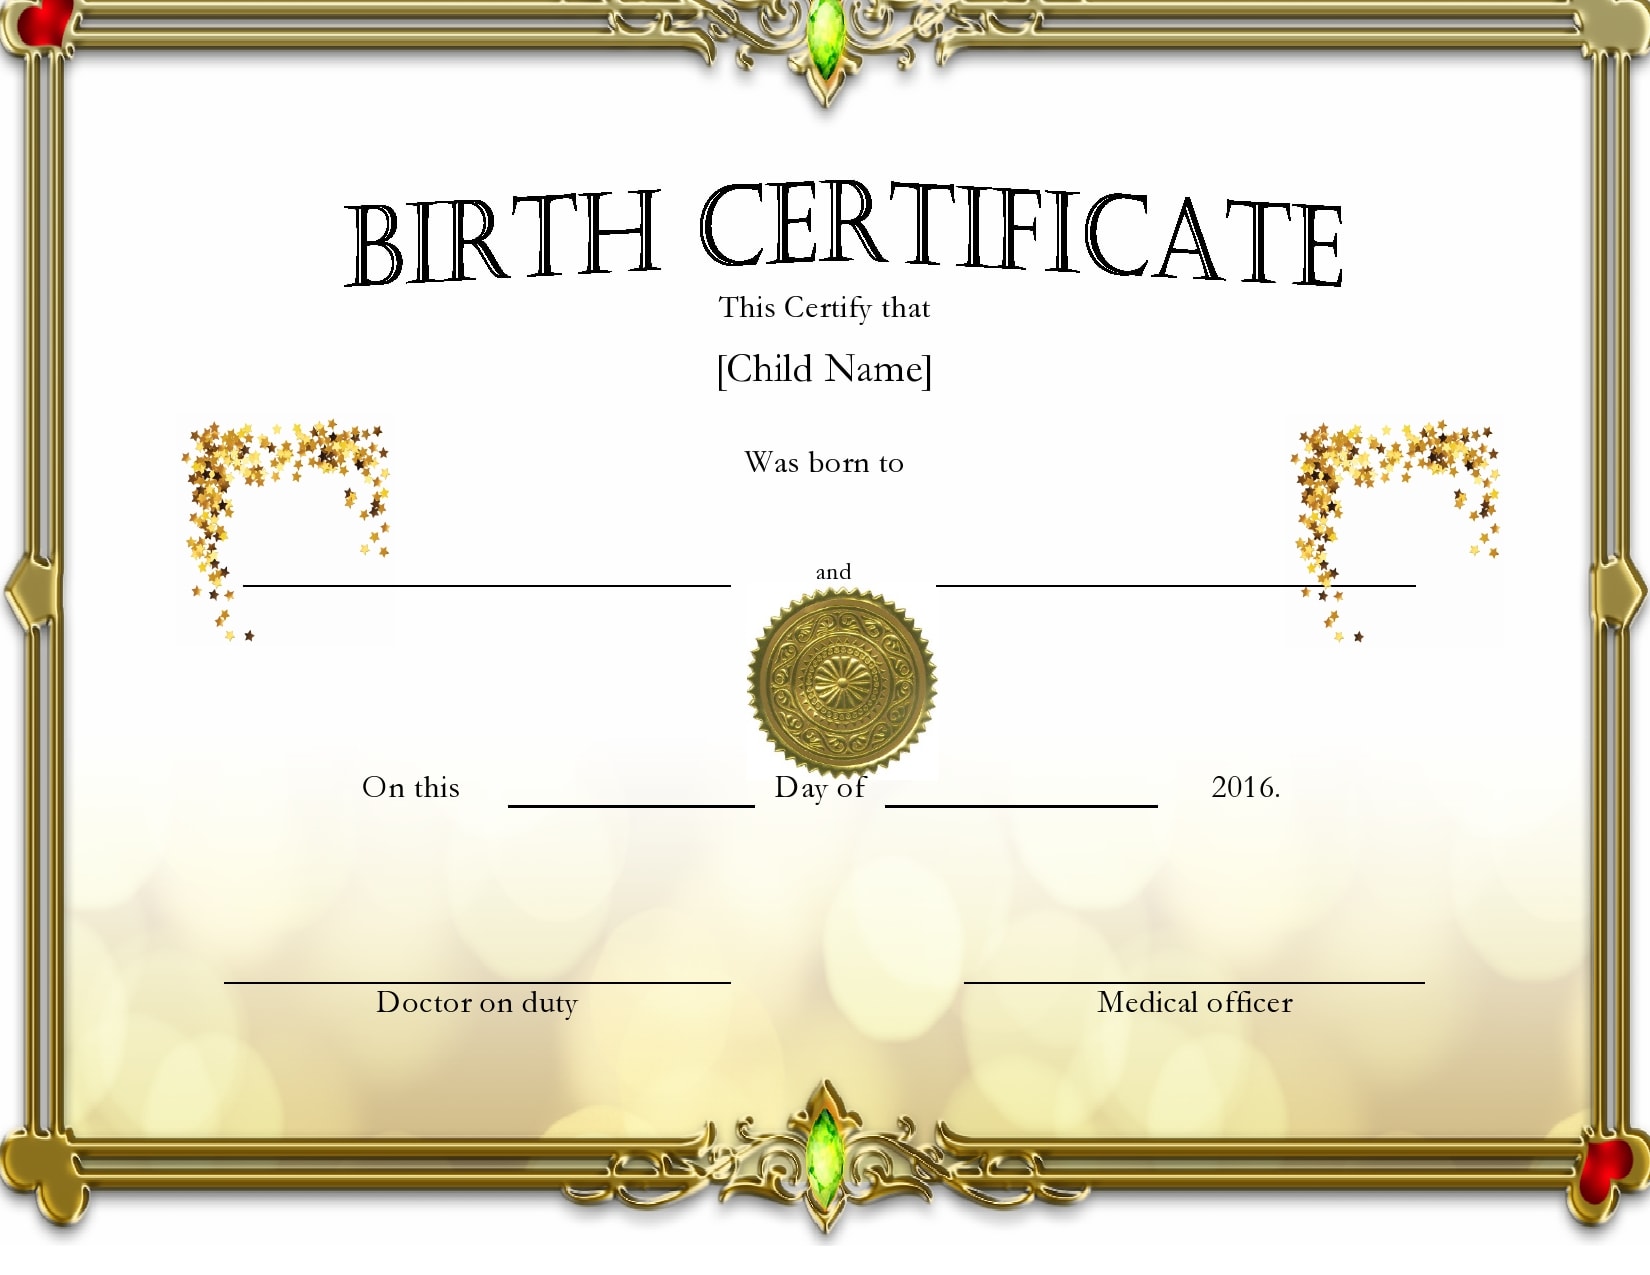 23 Blank Birth Certificate Templates (& Examples) - PrintableTemplates In Ownership Certificate Template